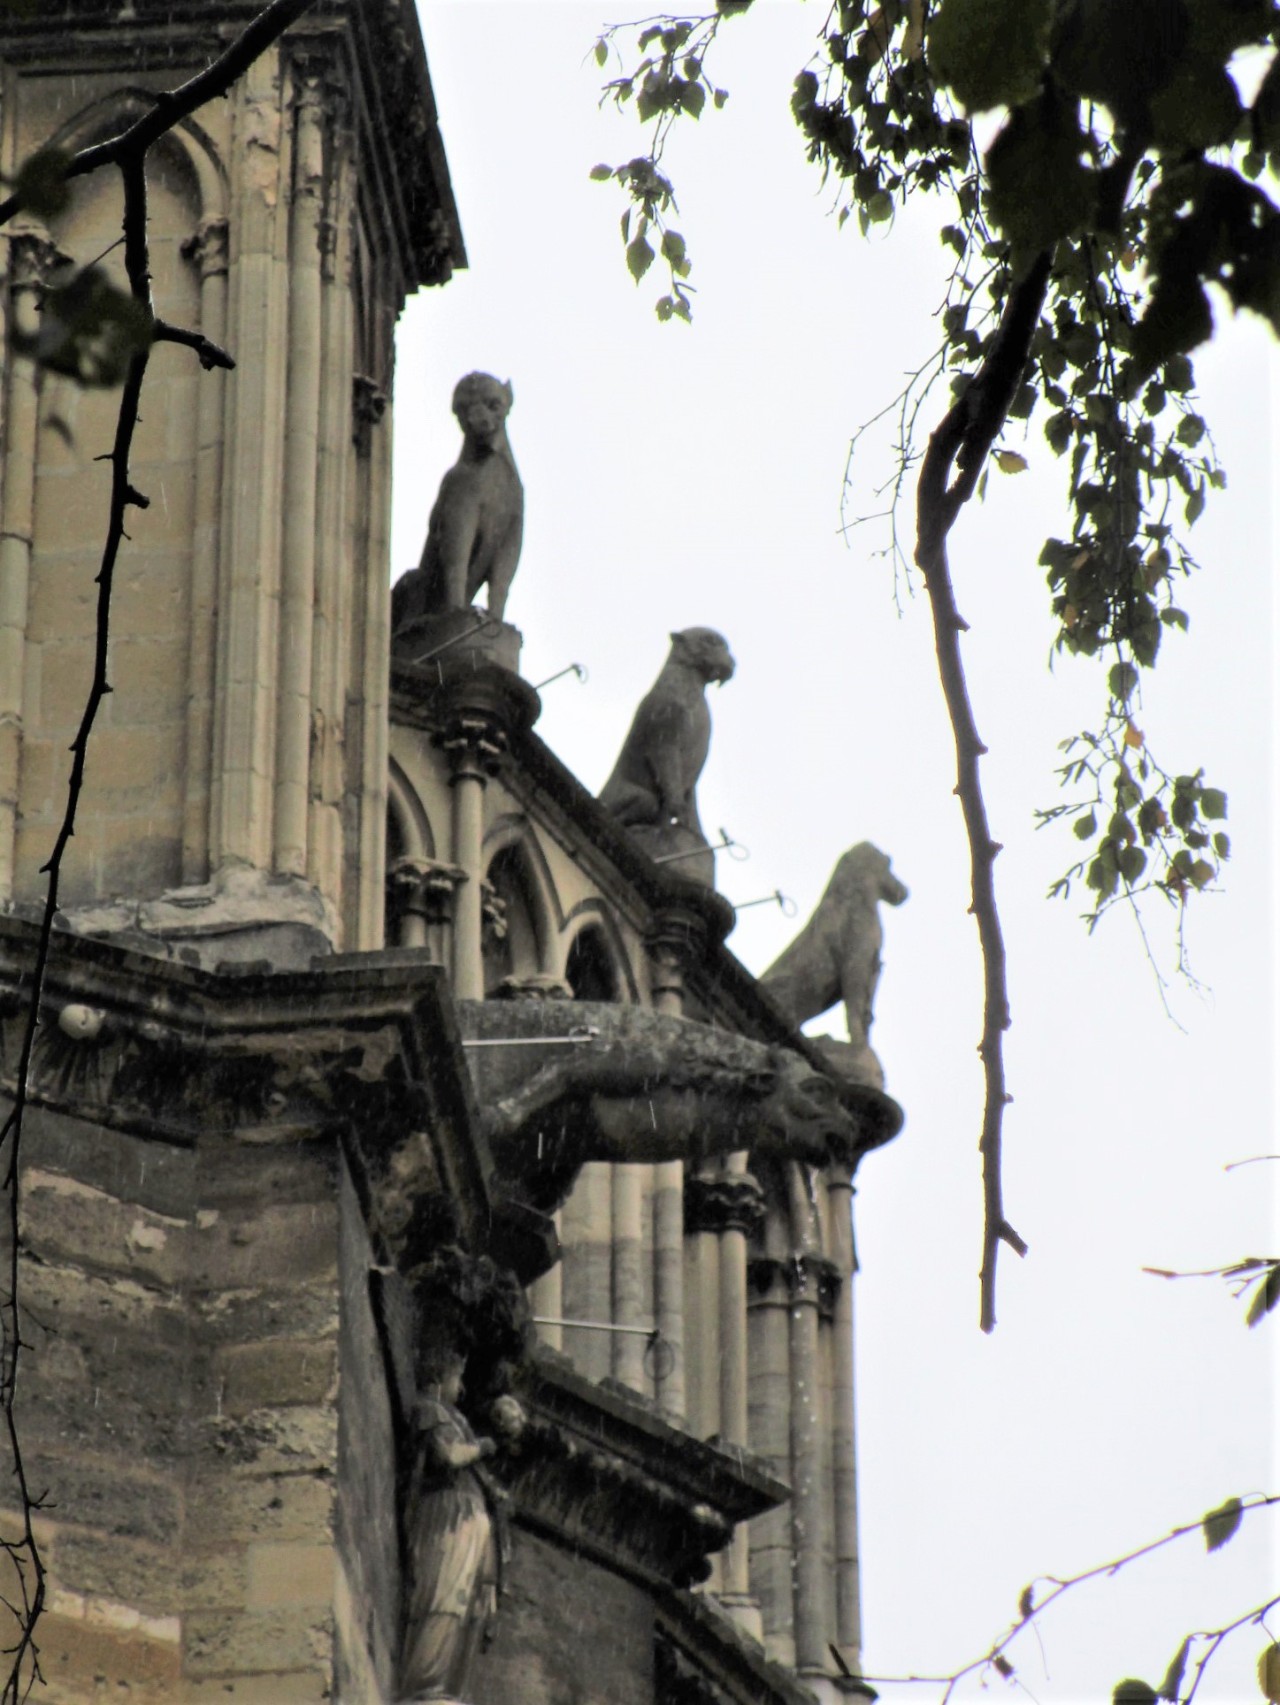 A few gargoyles on the Basilica of Saint-Remi in Reims.  These guys were doing their job, spitting out water, because it was pouring rain when I took these pictures. #I was soaked to the skin  #I wont need an umbrella I said #Gothic architecture#medieval#France#travel photos